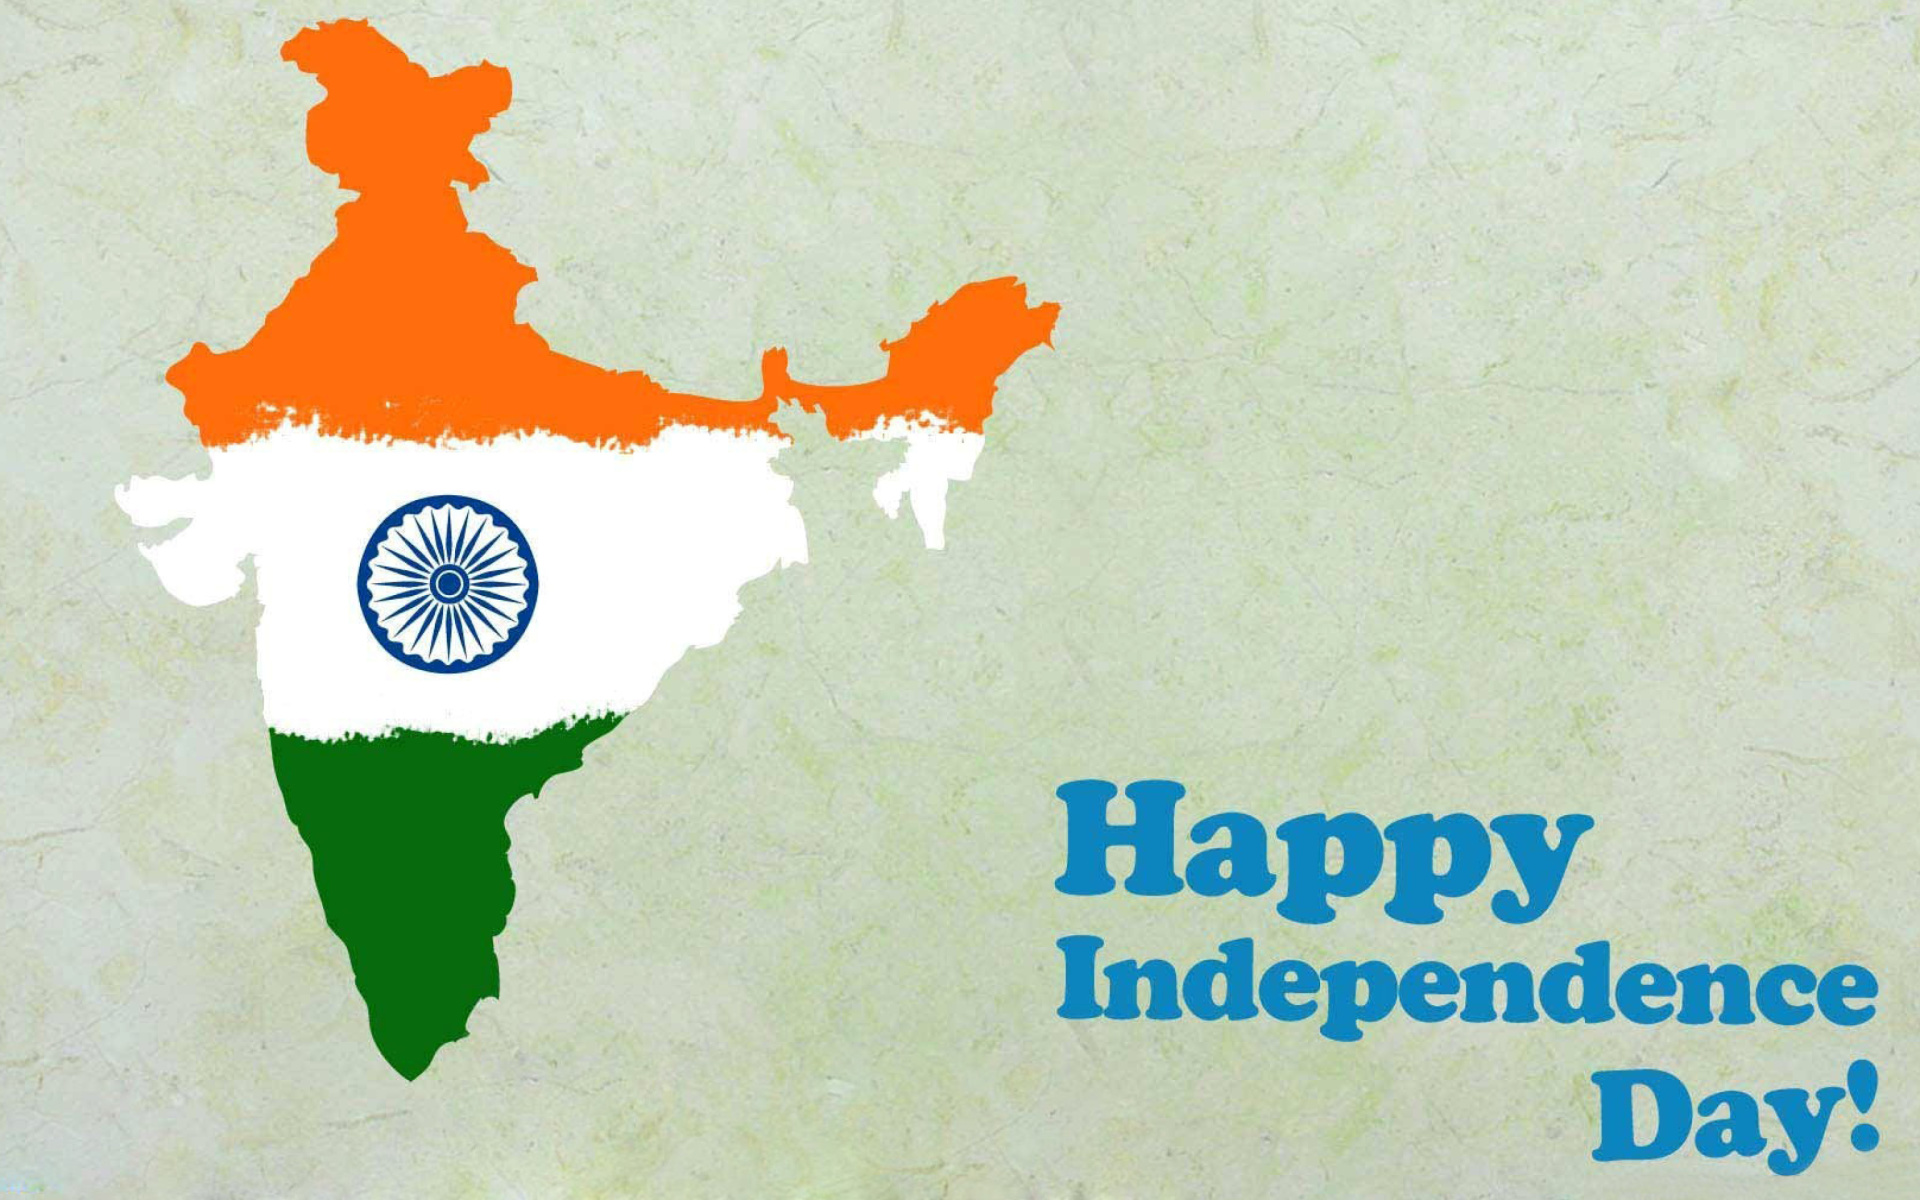 Happy Independence Day India screenshot #1 1920x1200